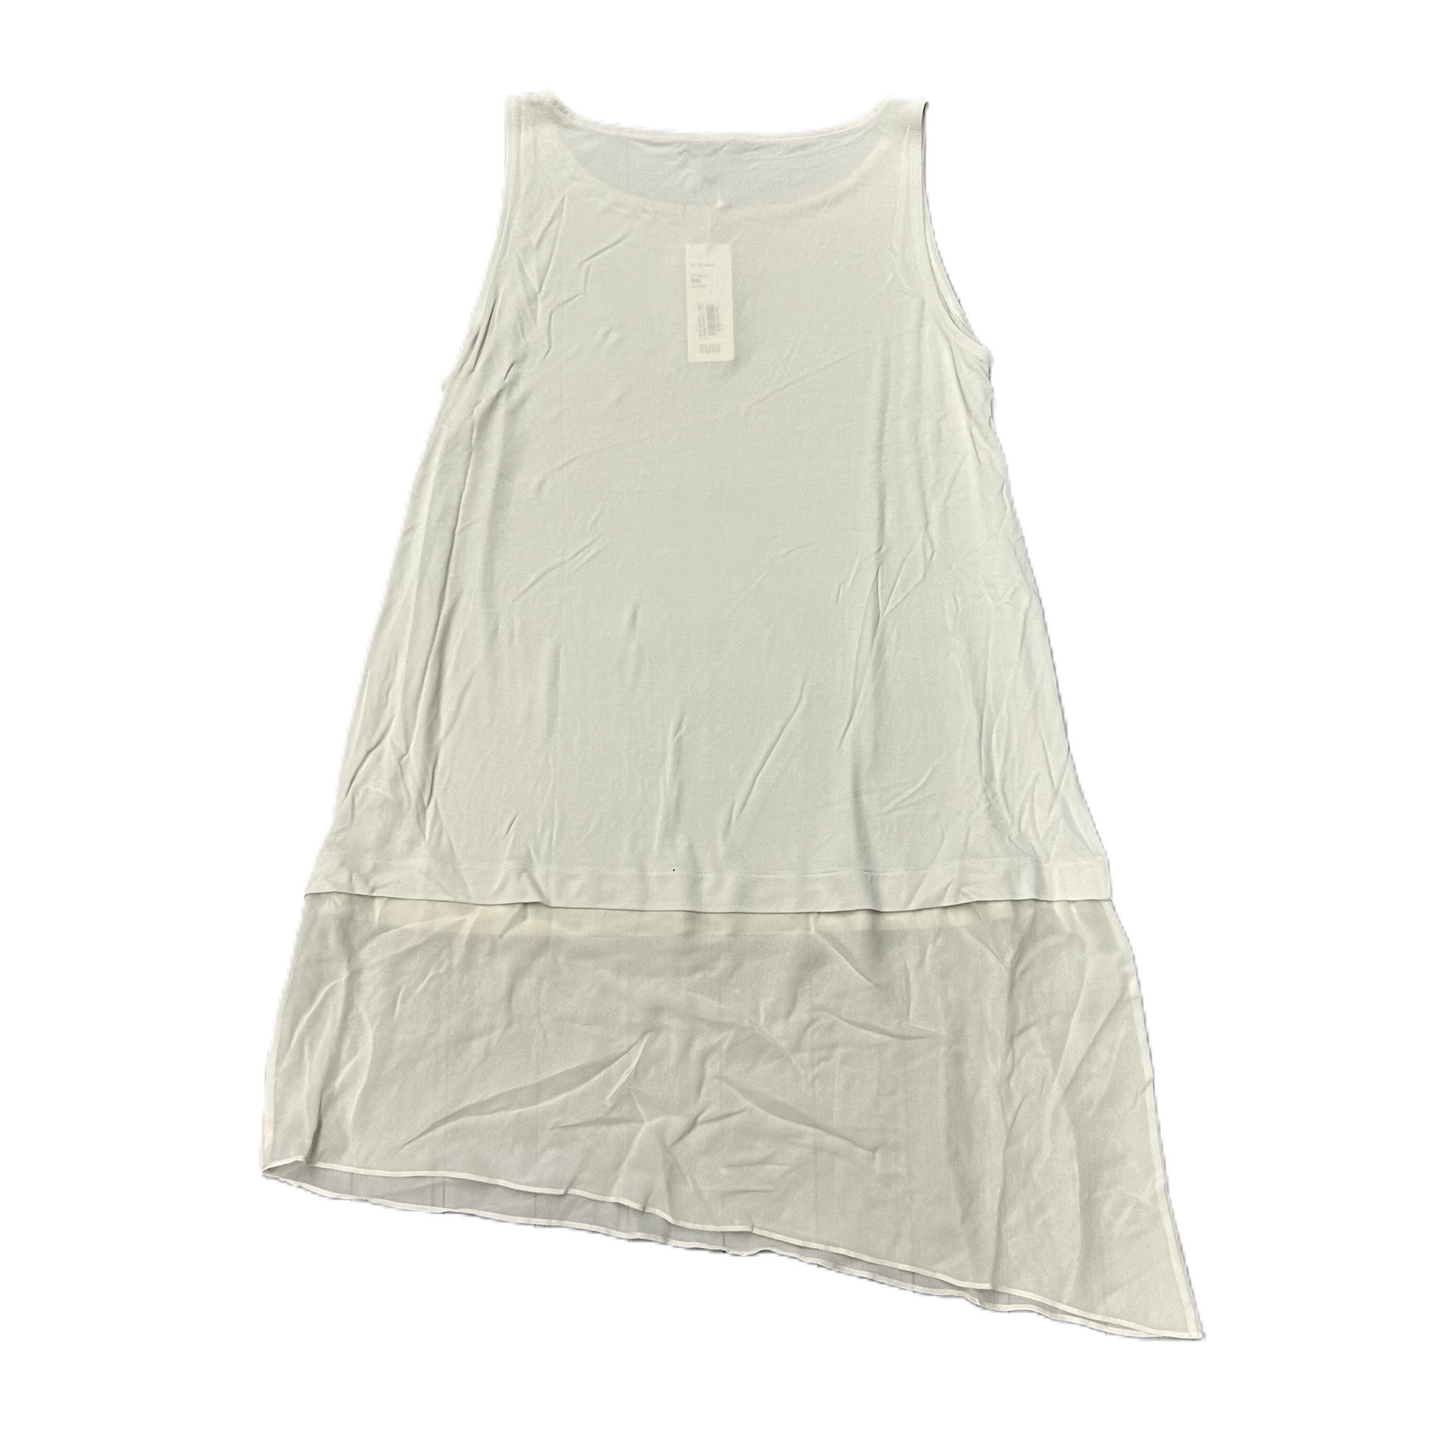 Cream Top Sleeveless By Eileen Fisher, Size: L